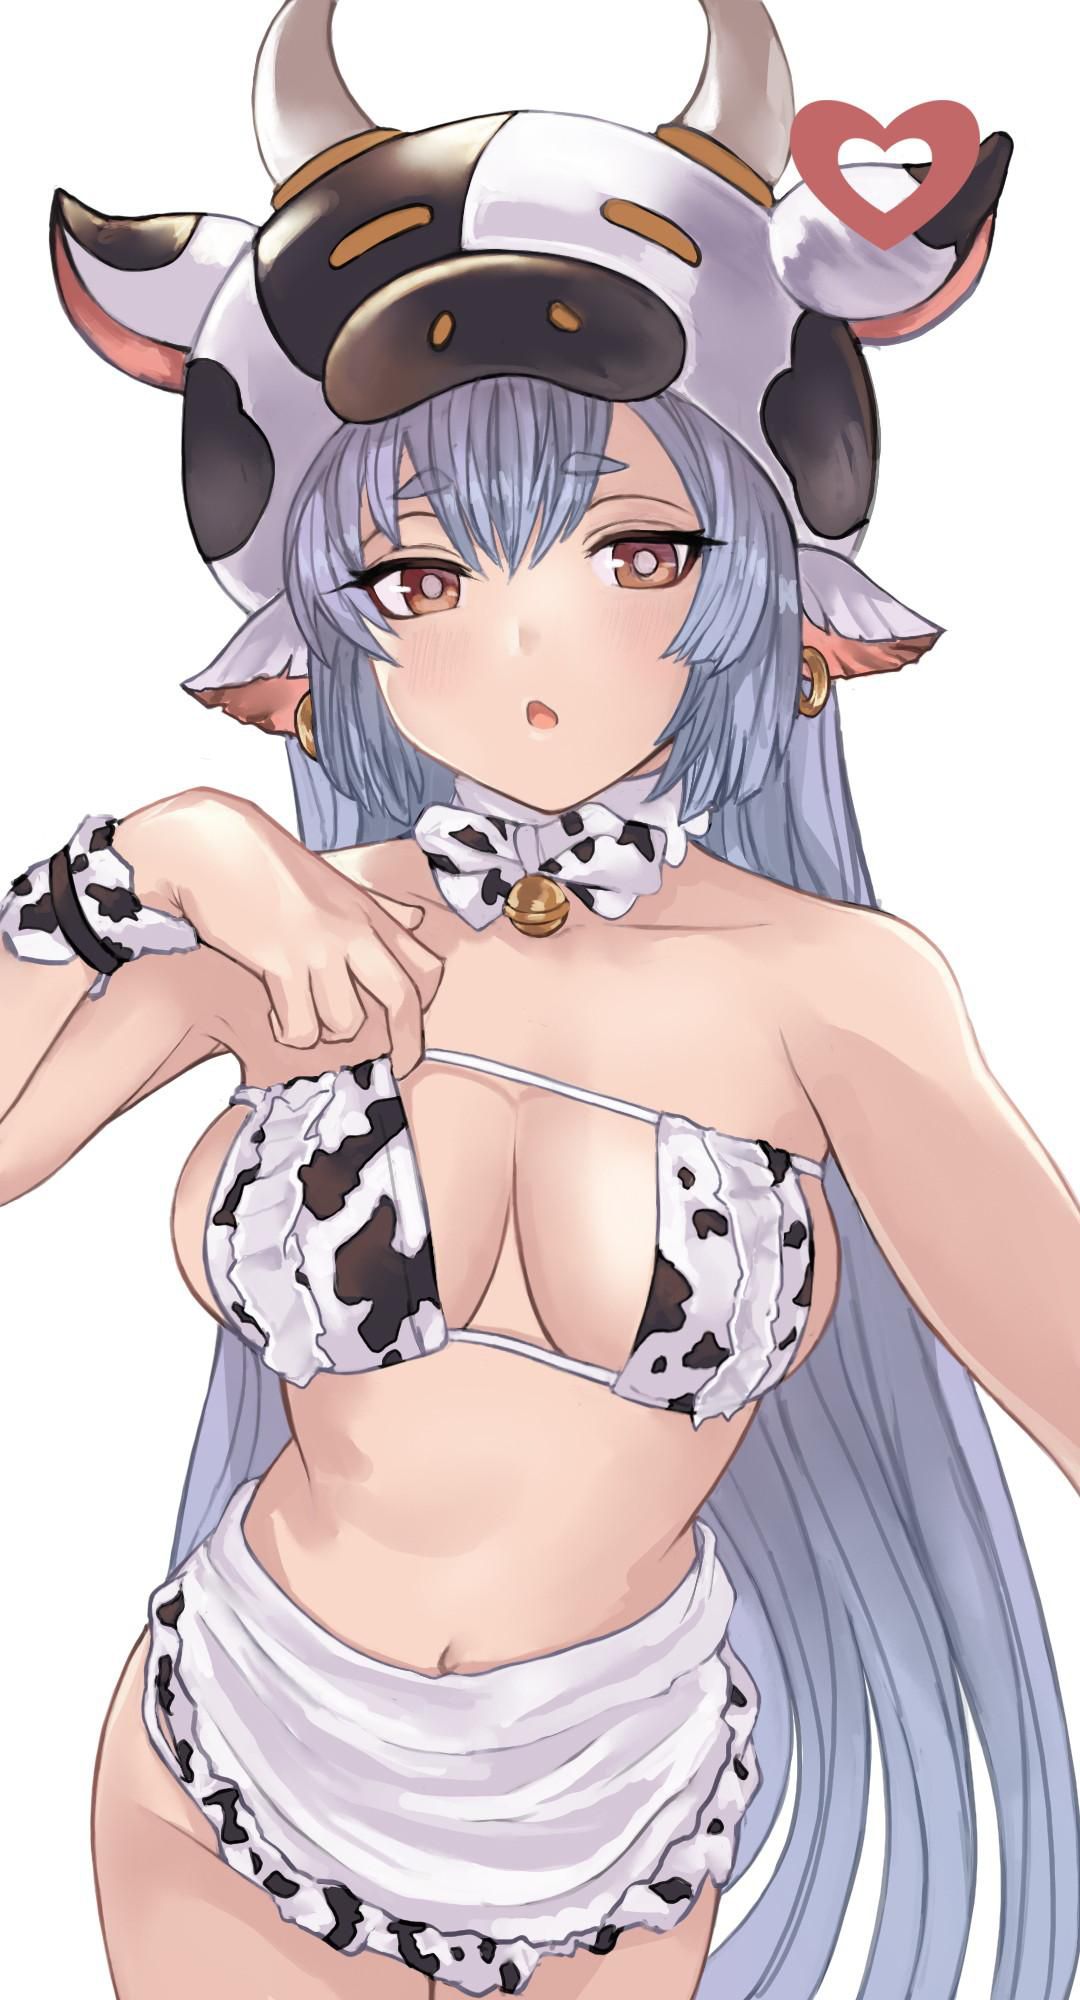 The Gran Blue Fantasy image warehouse is here! 2